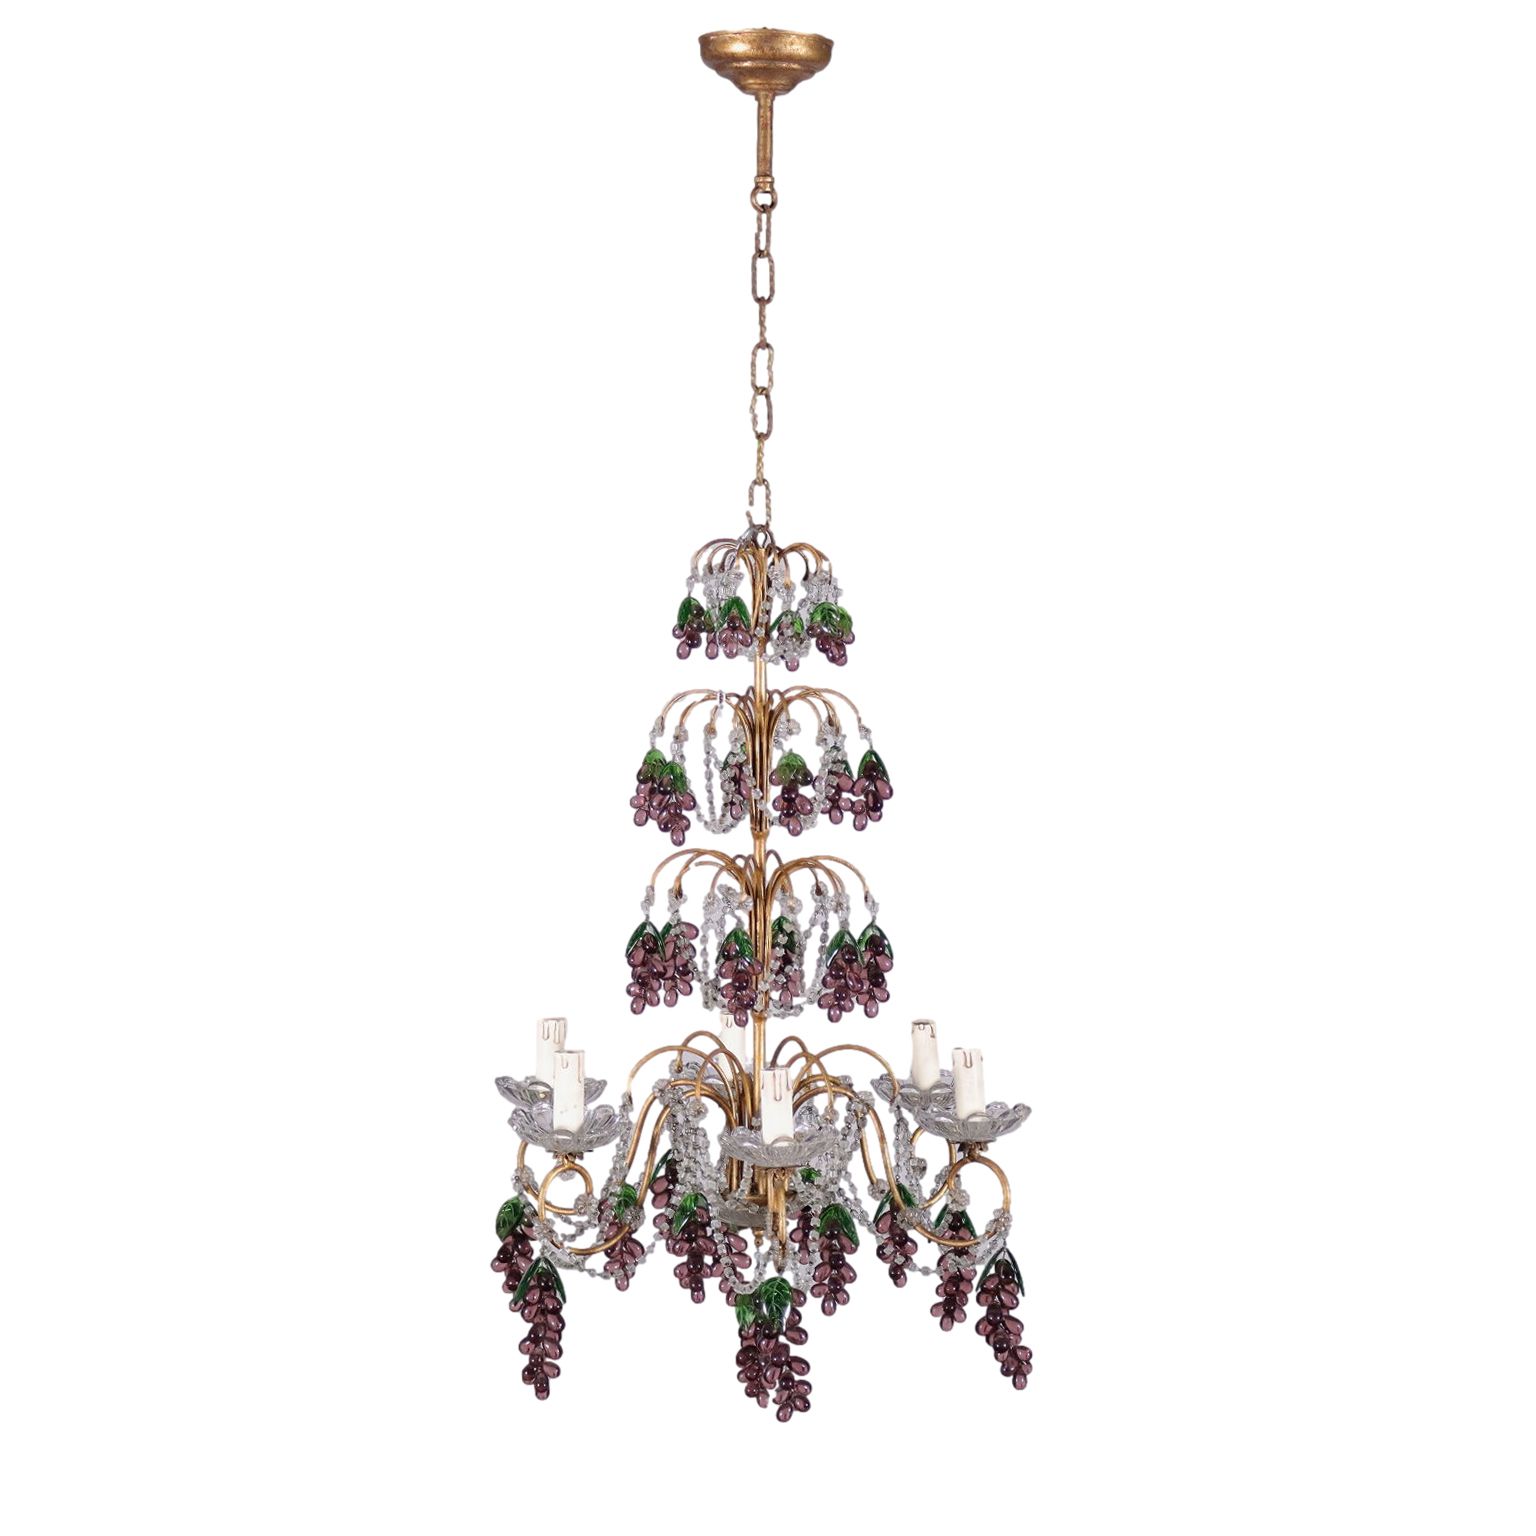 Latest Pearl Bronze Lantern Chandeliers Throughout Chandelier With Vitreous Bunches, Antiques, Chandeliers And Lamps,  Dimanoinmano (View 14 of 15)